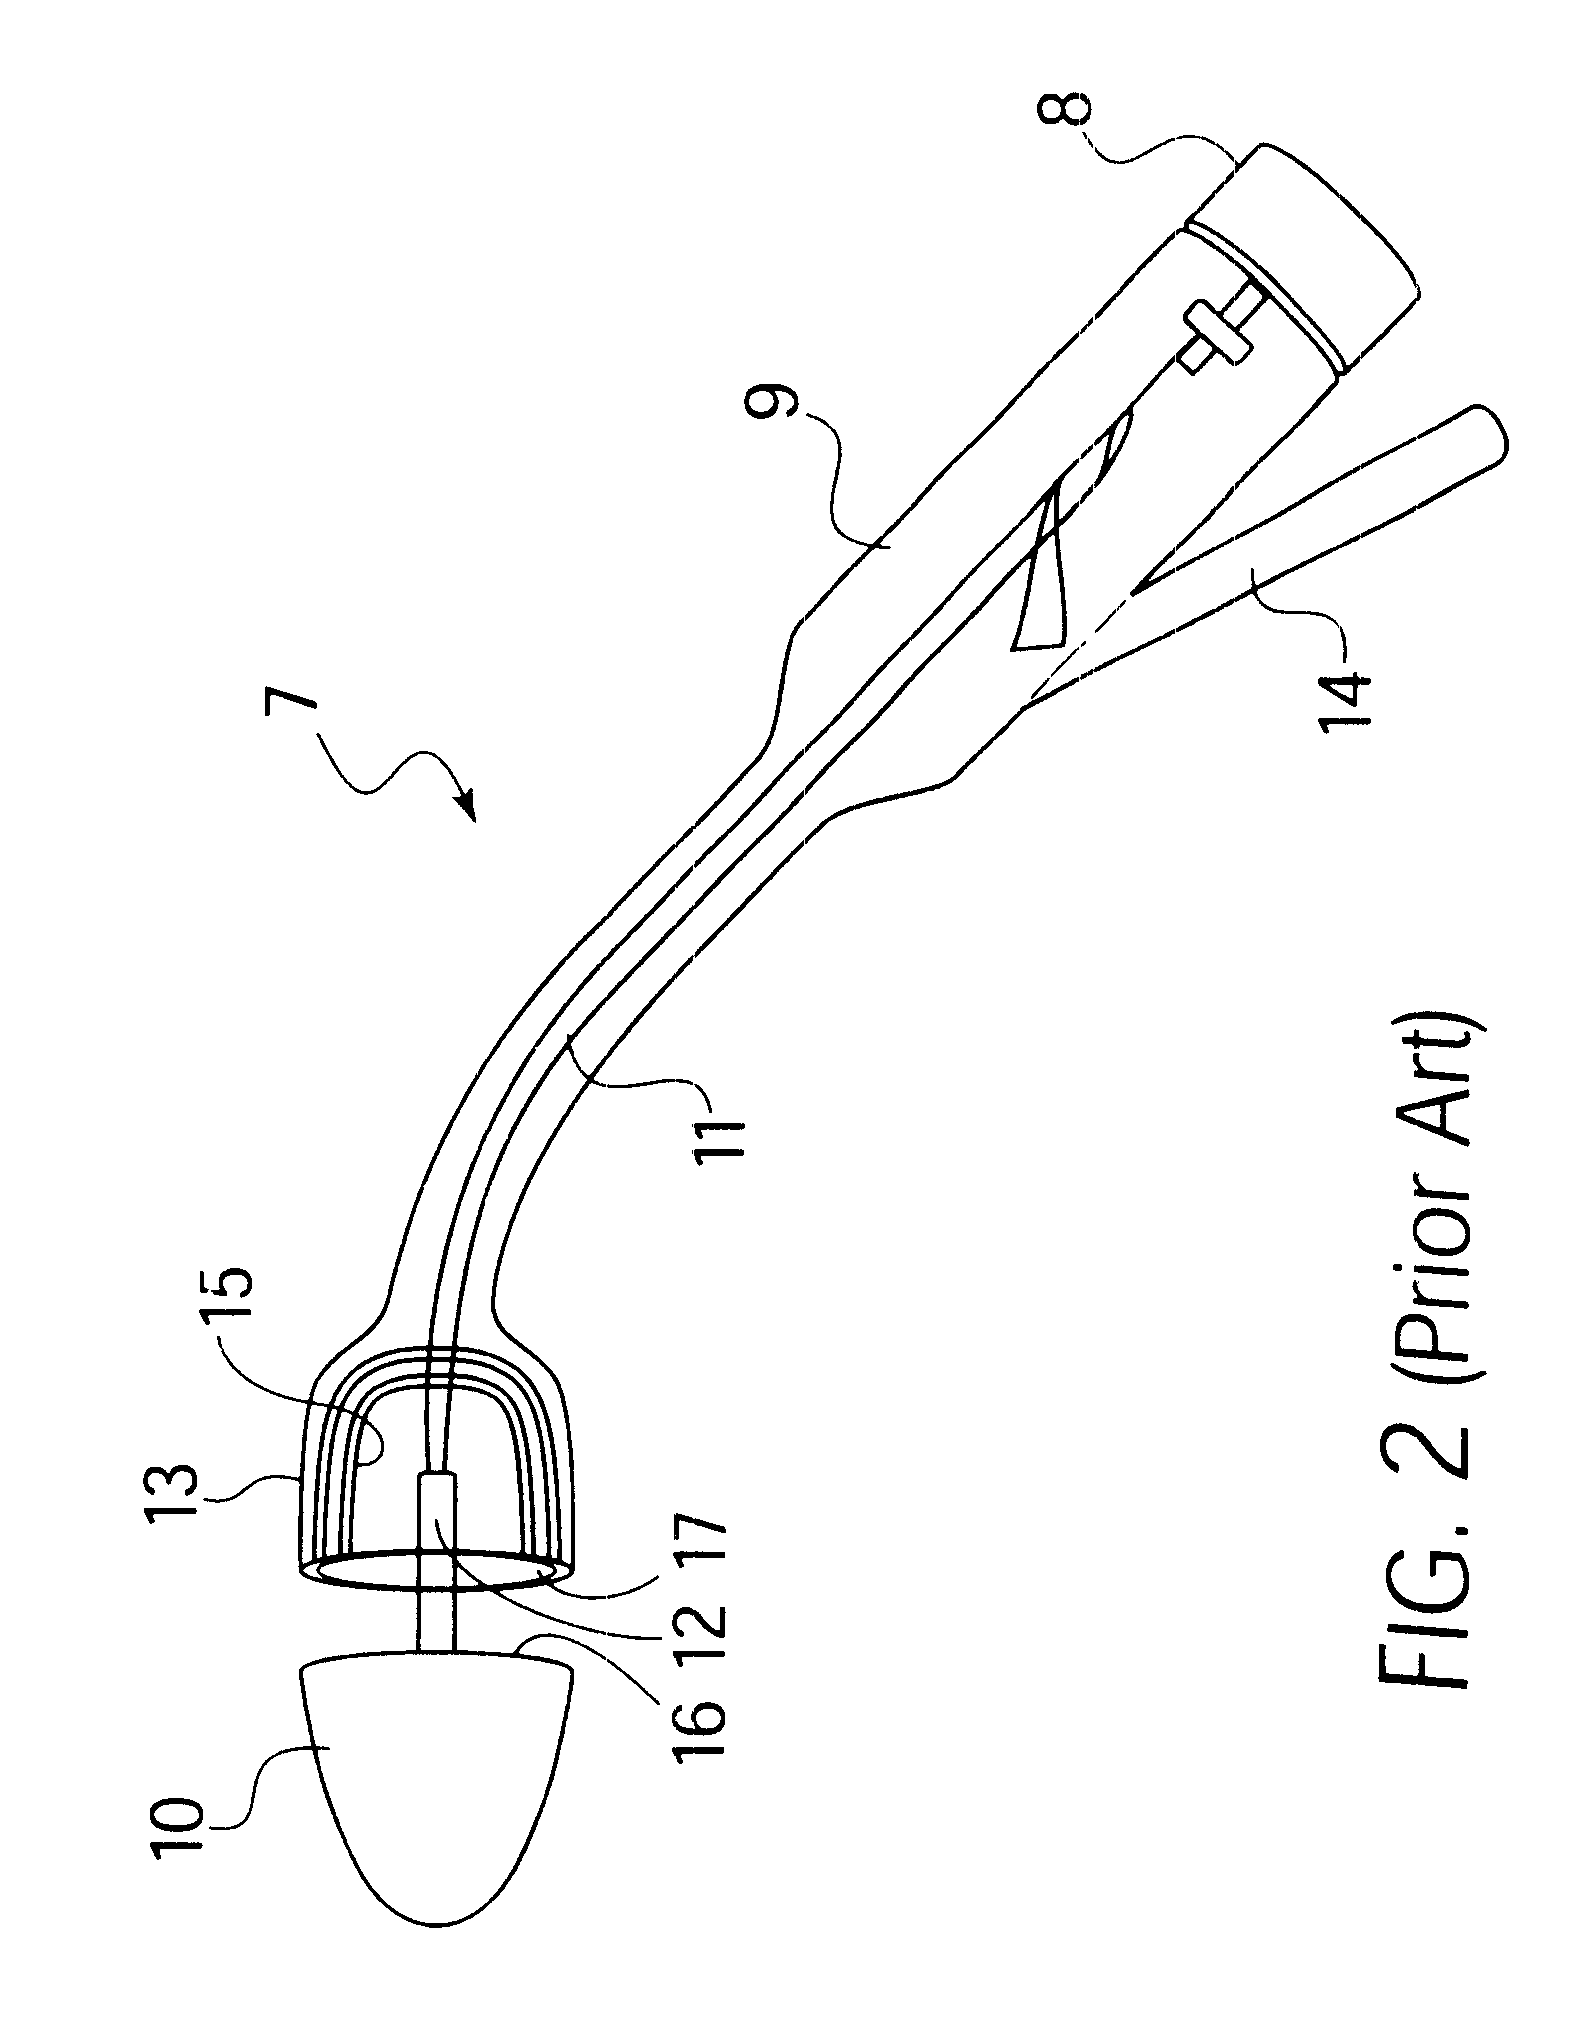 Fluid delivery mechanism for use with anastomosing, stapling, and resecting instruments